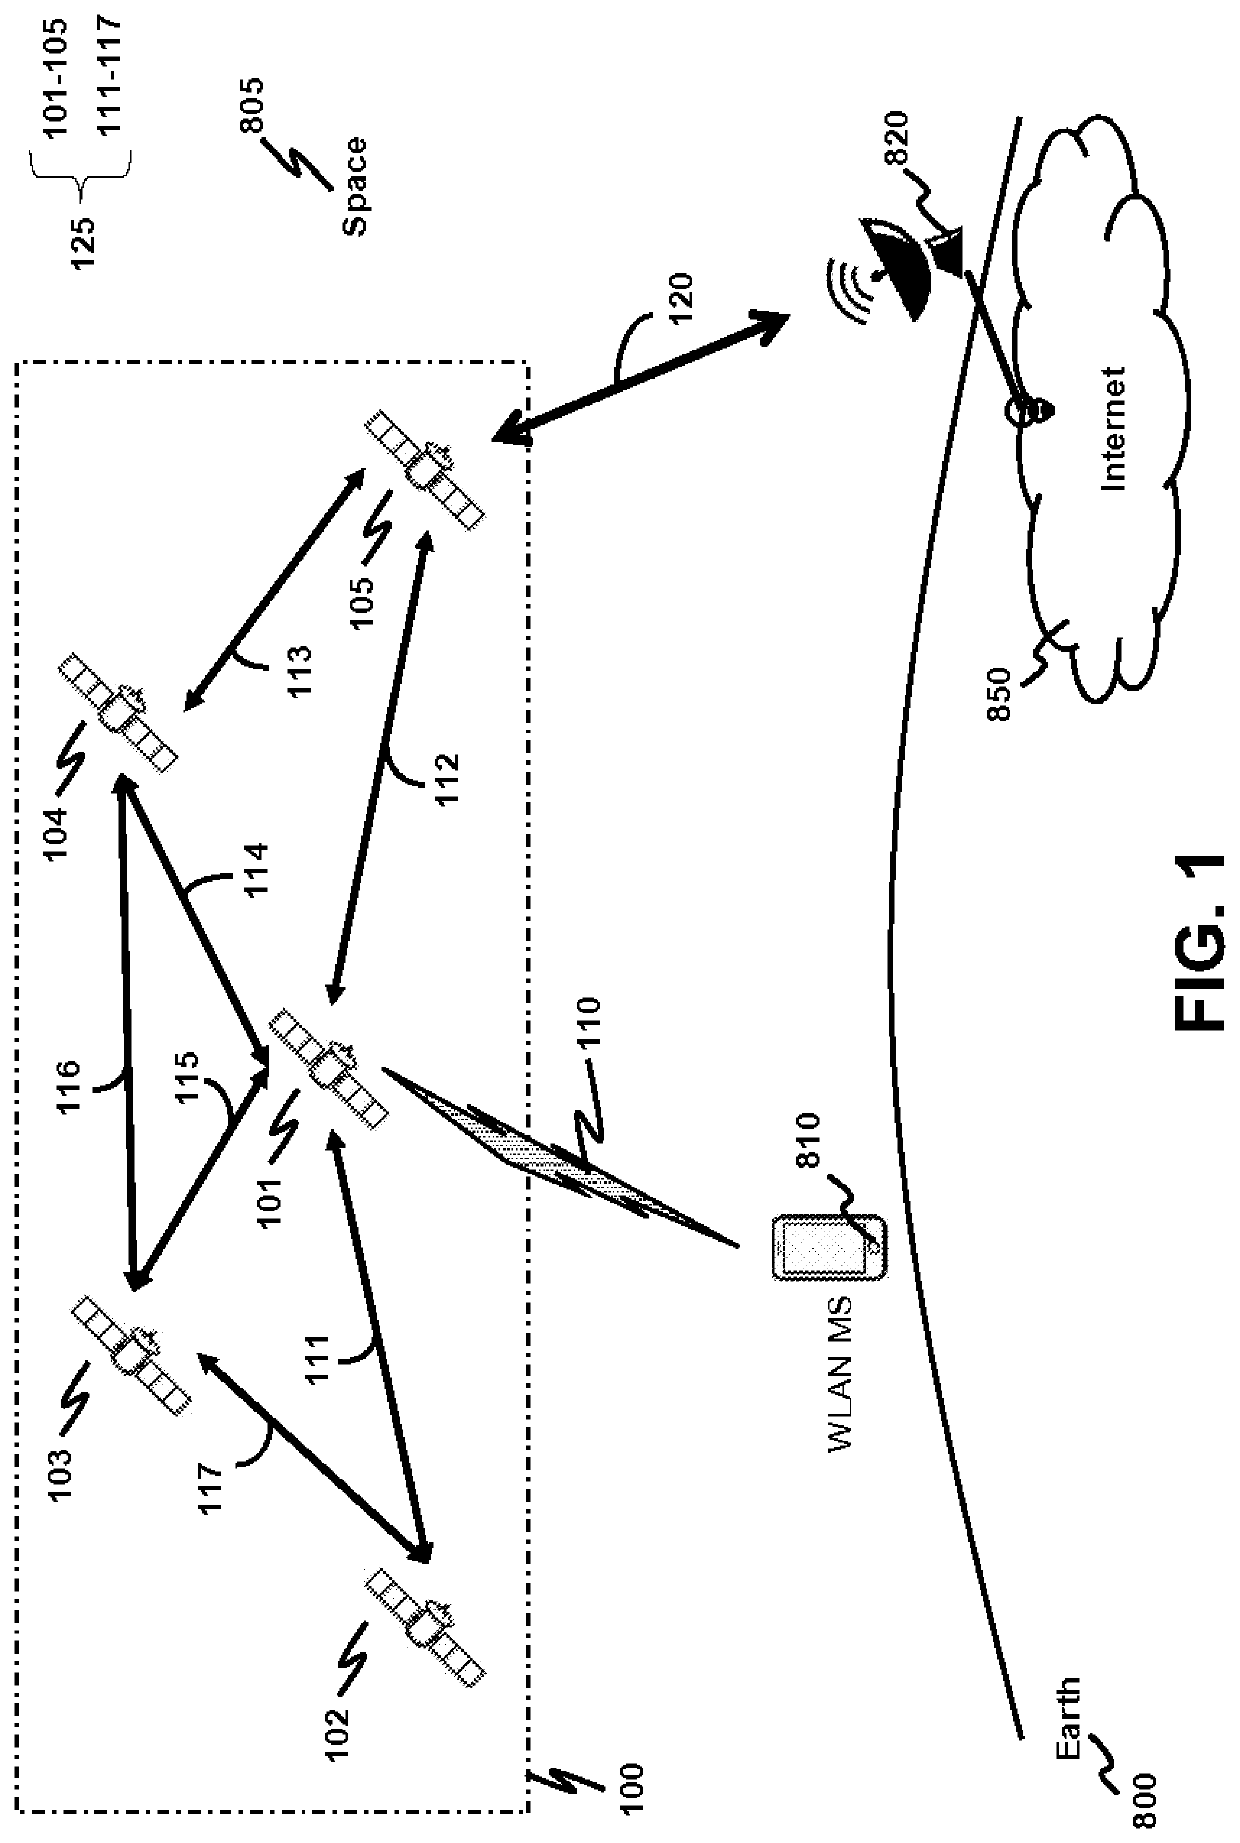 Wireless LAN Access Point from Space and Wireless LAN System Using the Same